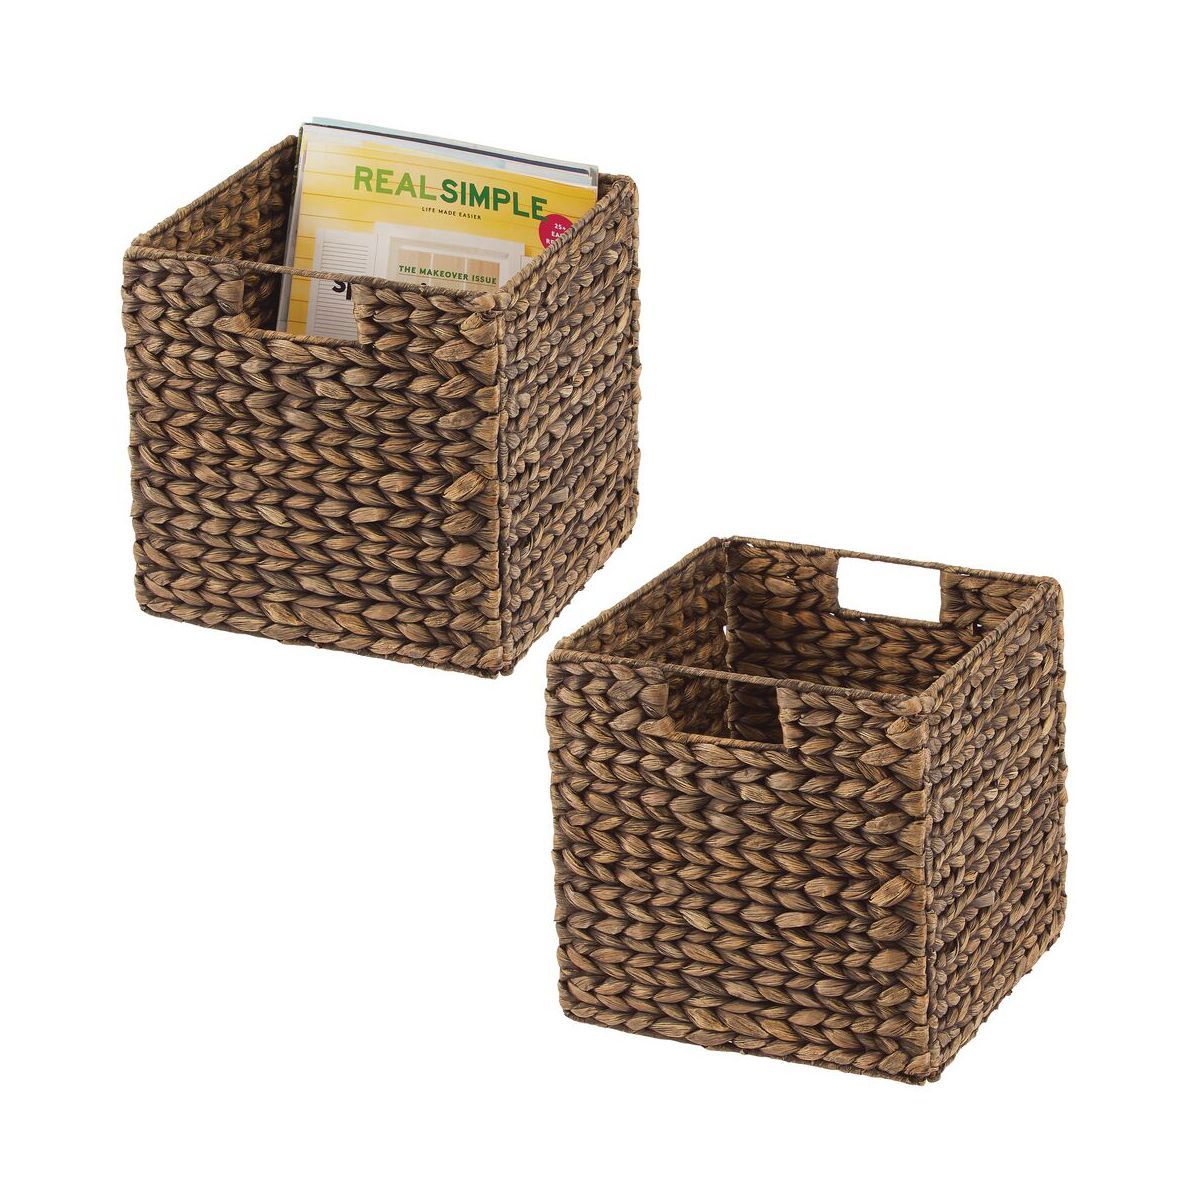 mDesign Large Woven Hyacinth Home Storage Basket for Cube Furniture, 2 Pack | Target